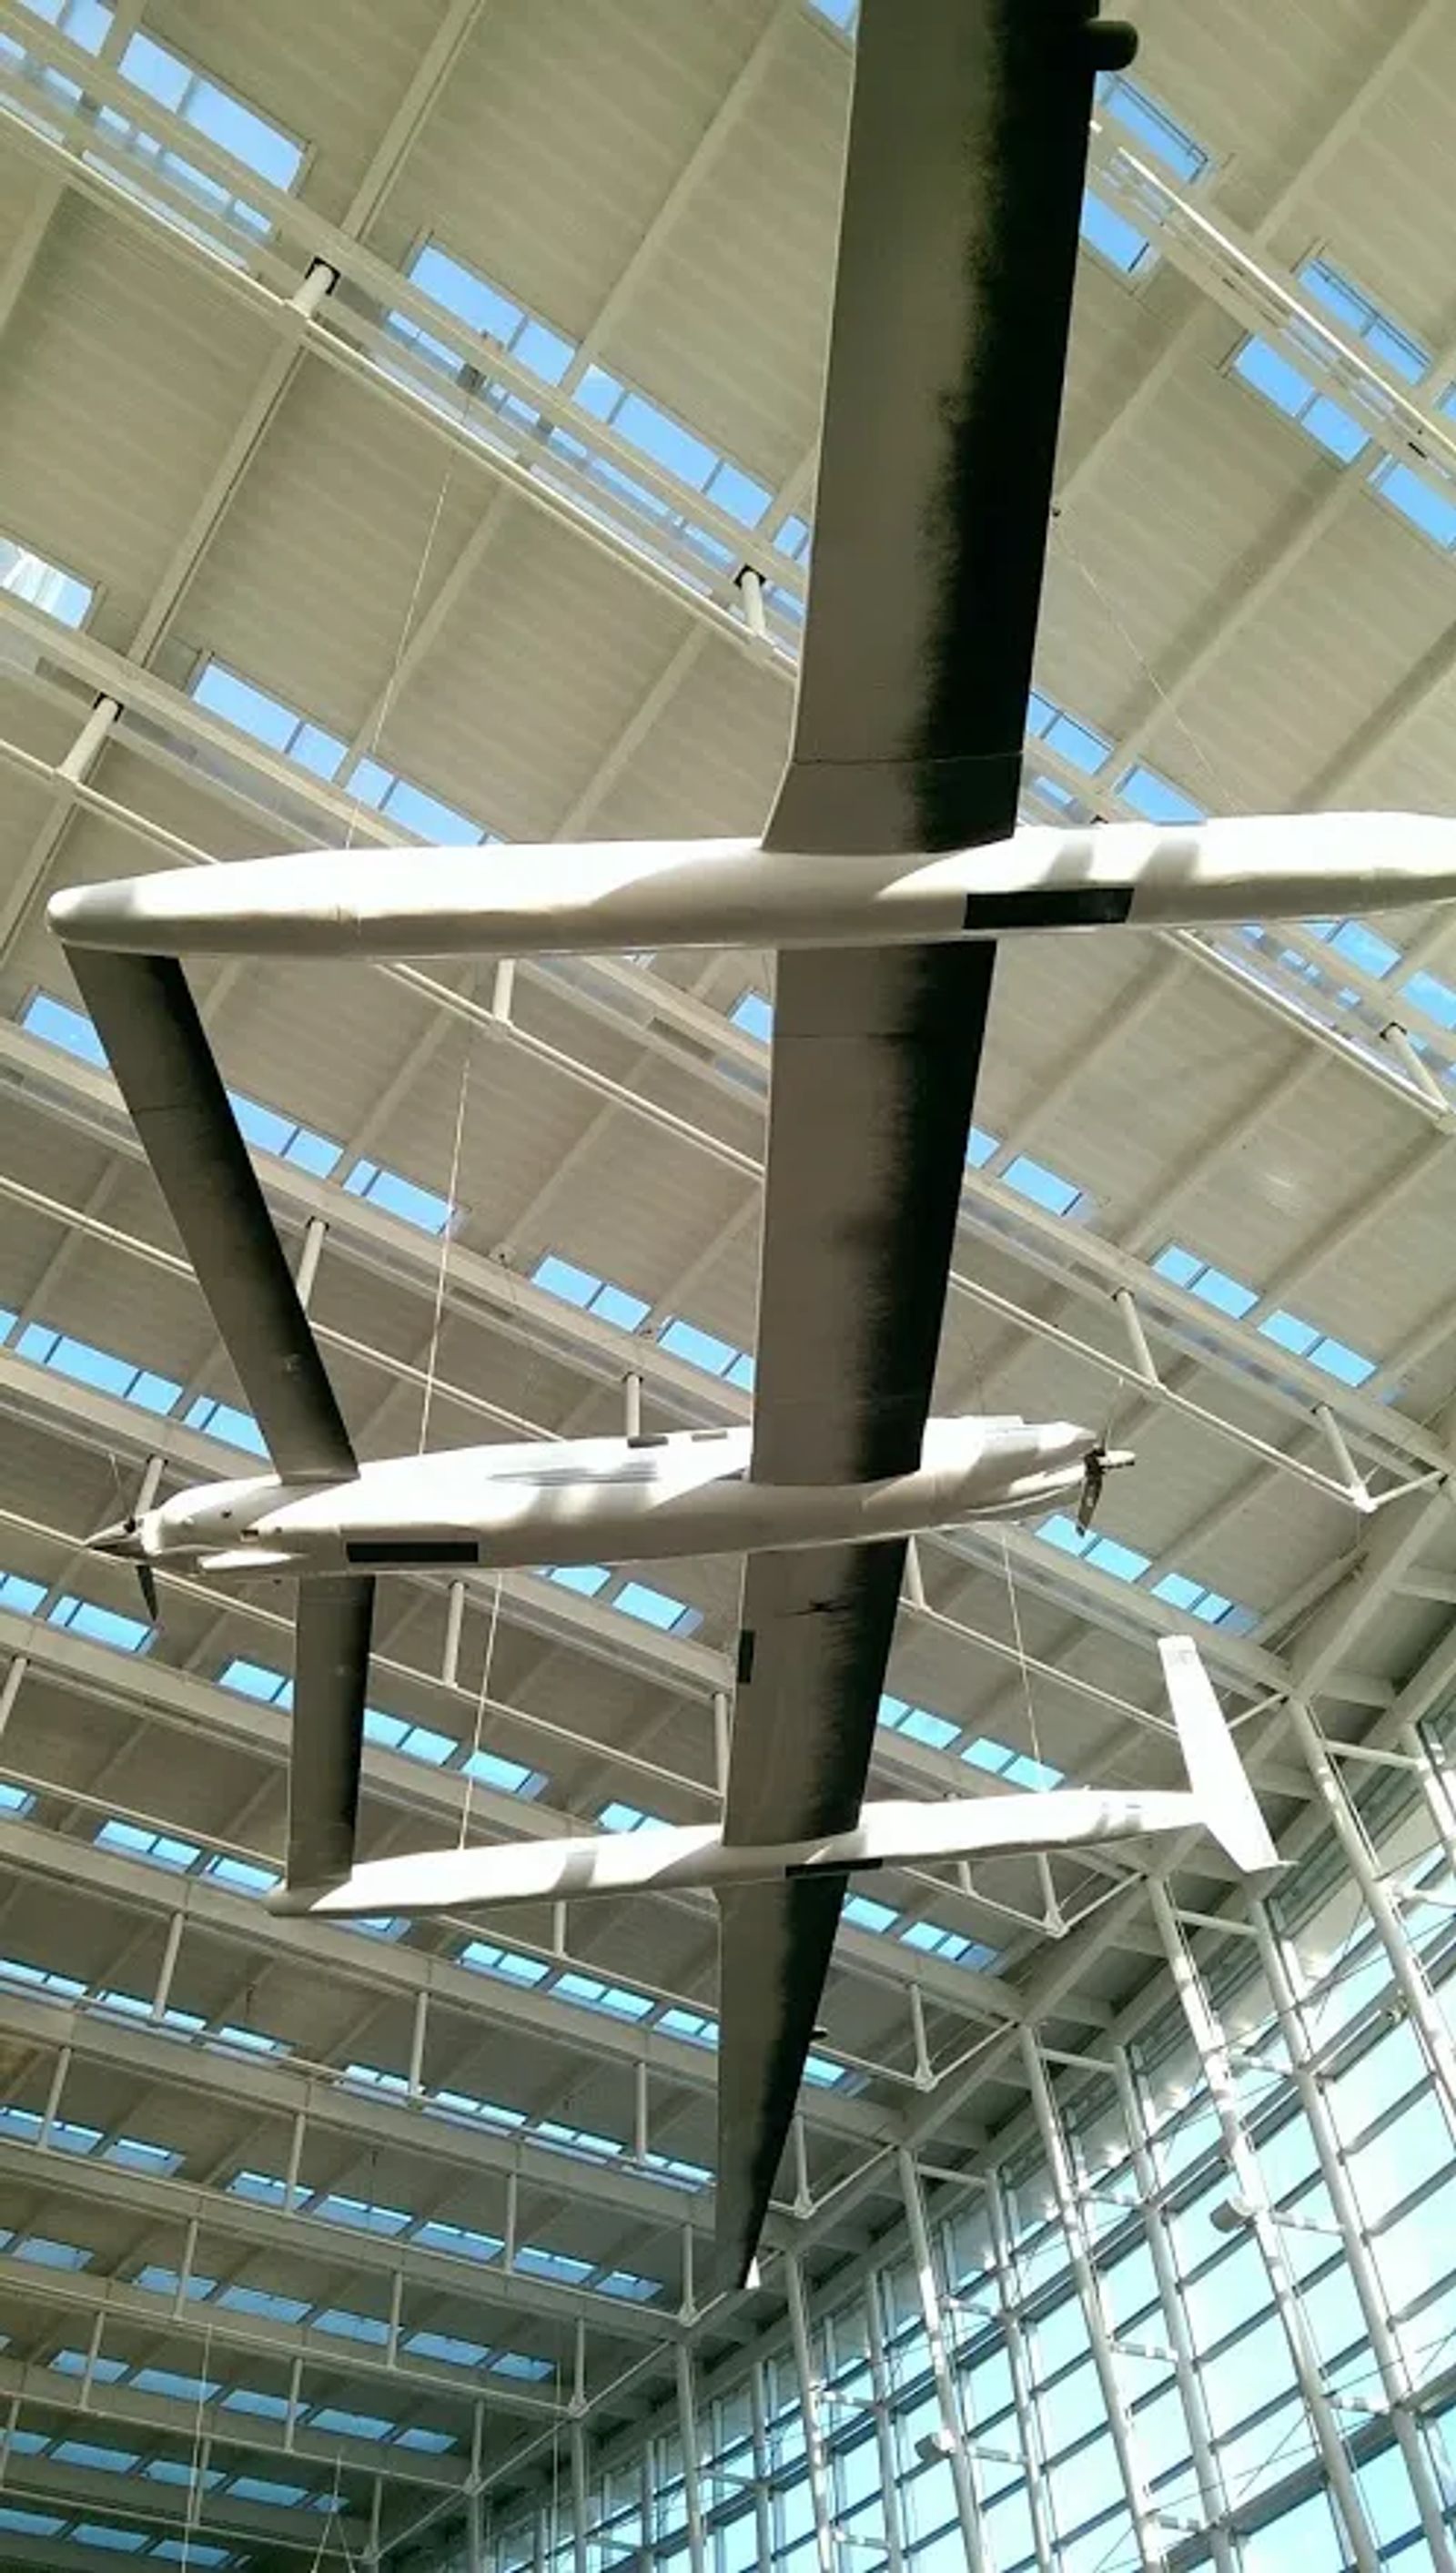 Photo of The Voyager Aircraft (full-scale mock up) in the Seattle Tacoma Airport